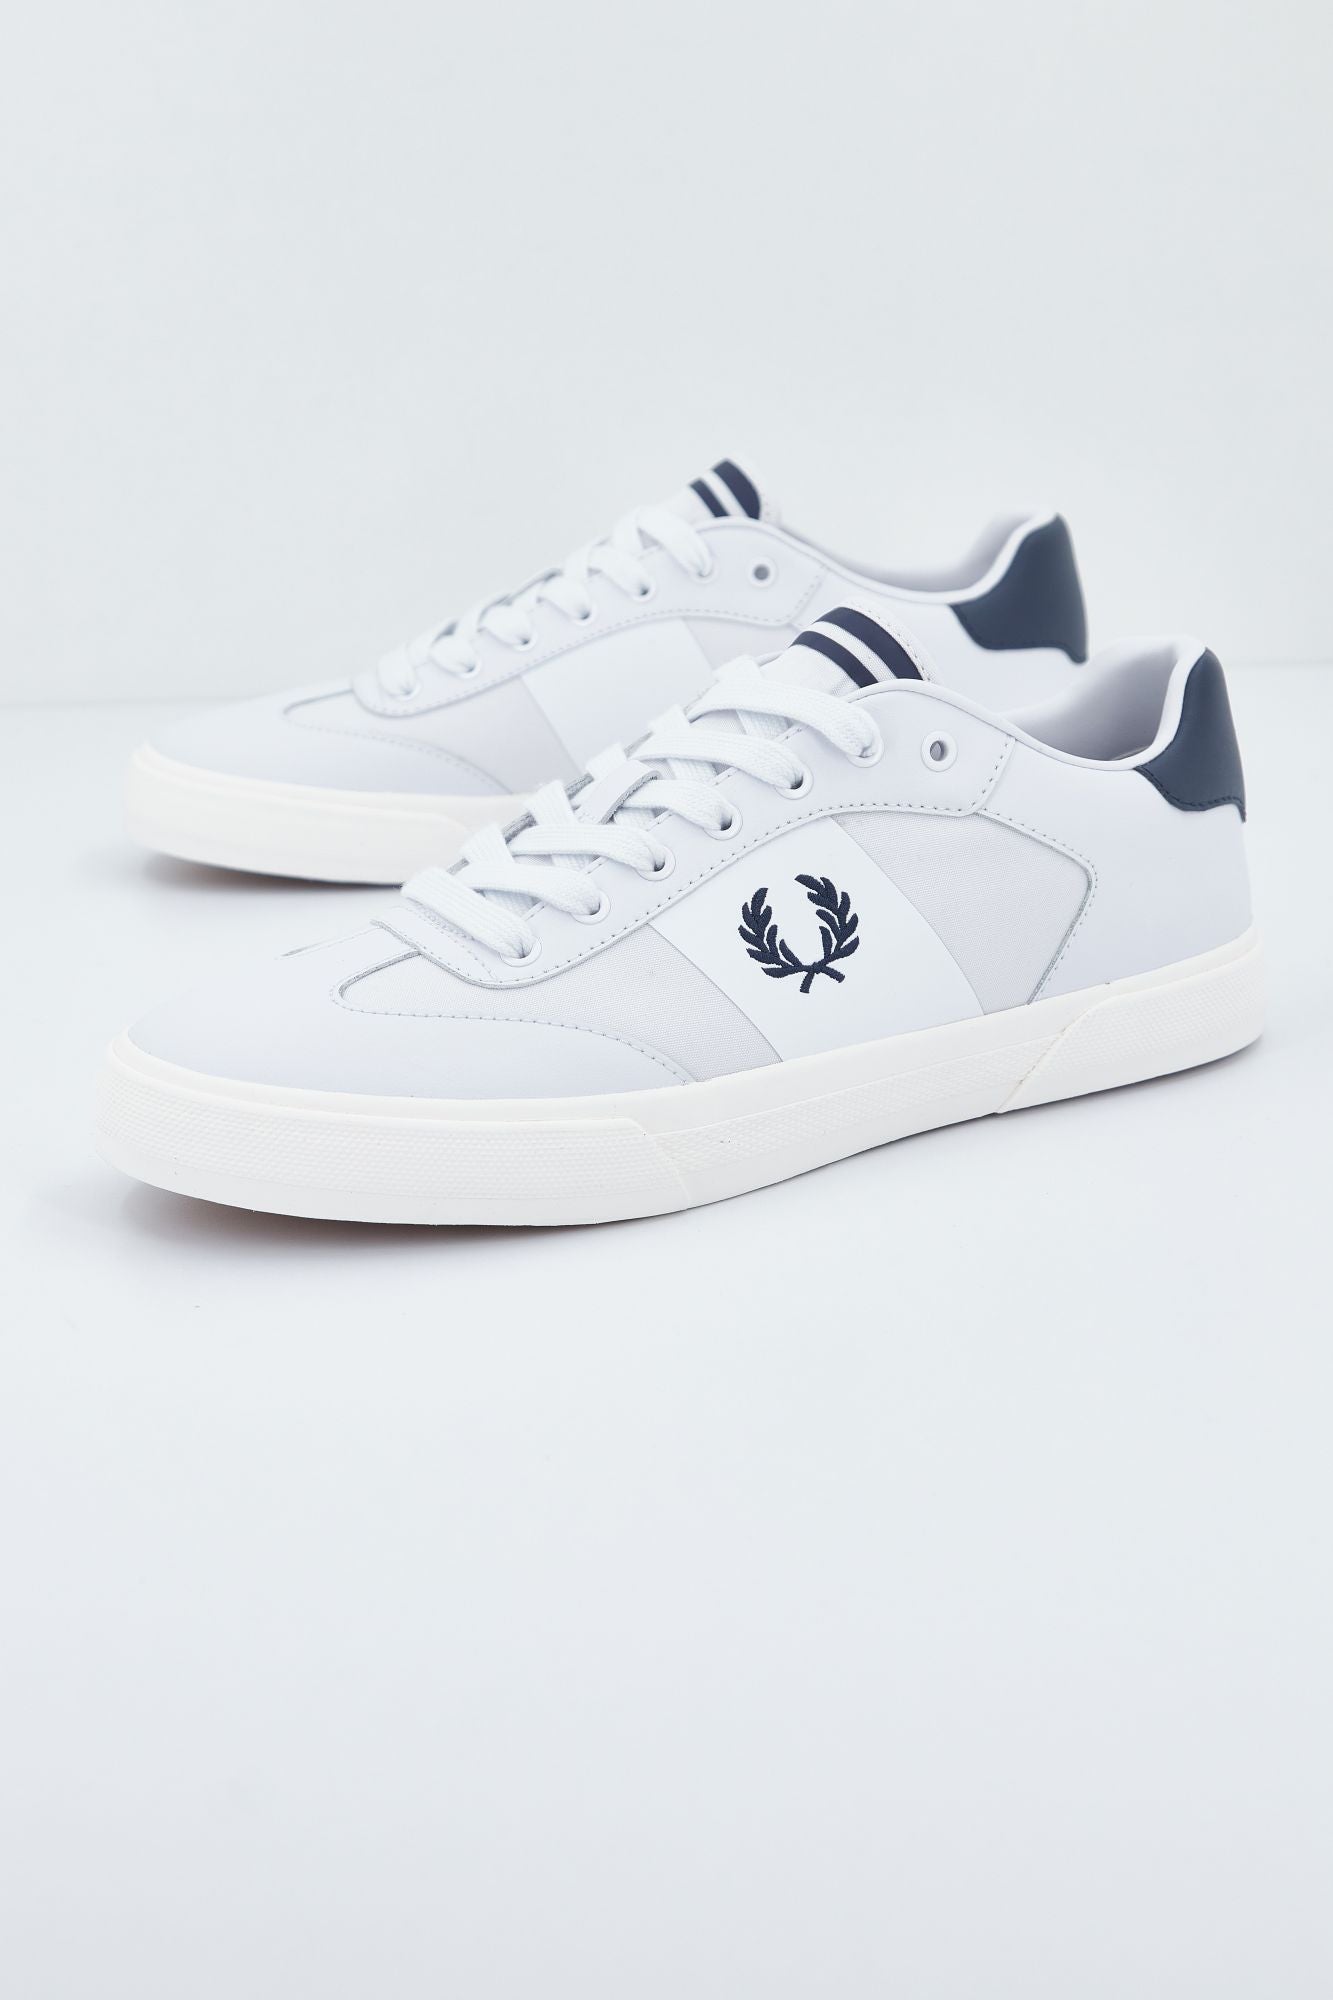 FRED PERRY CLAY LEATHER en color BLANCO (4)